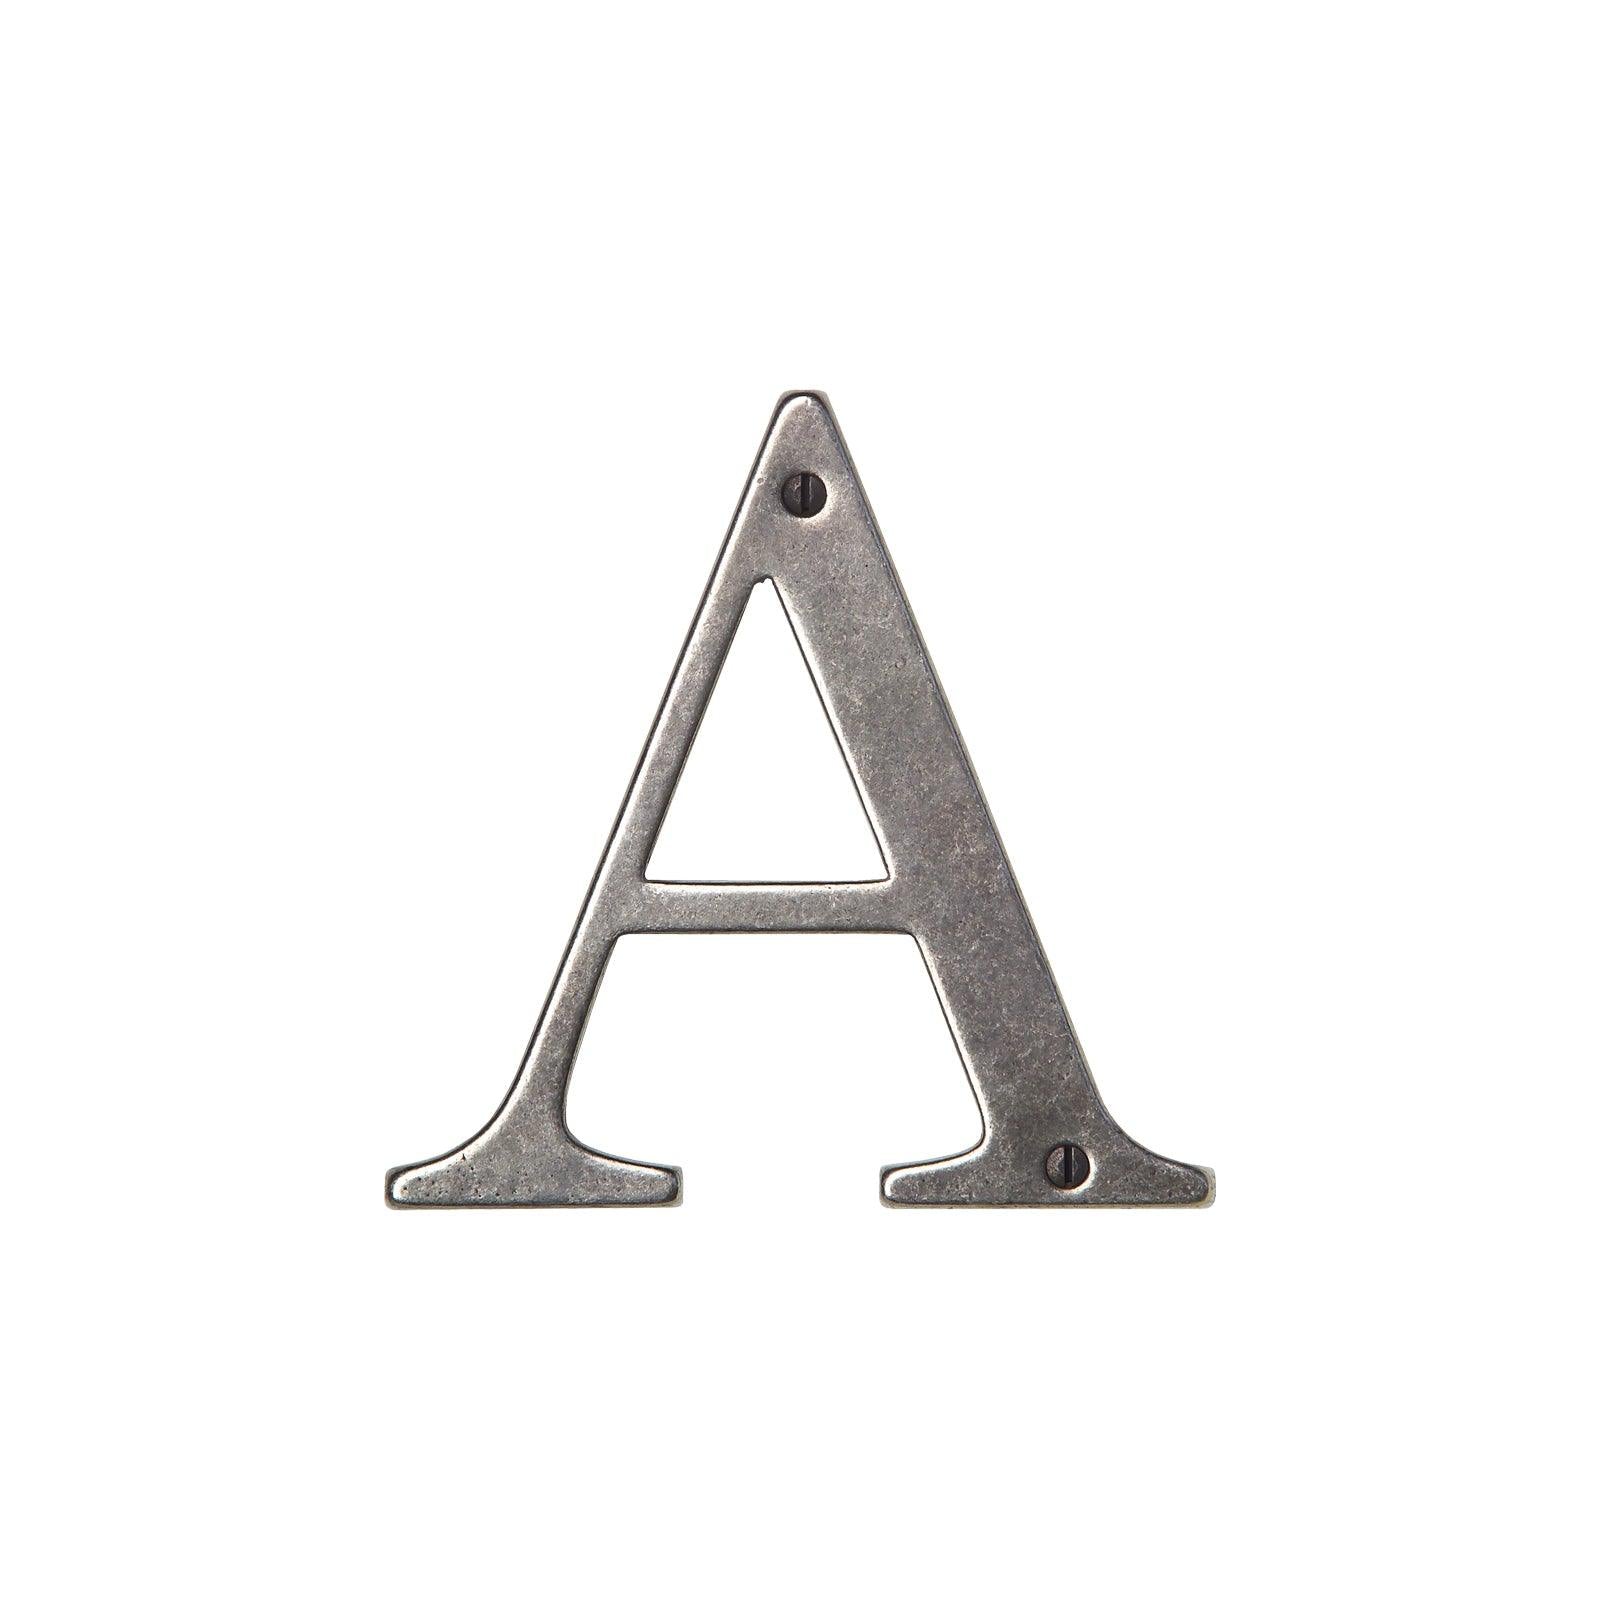 L400S - 4" House Letter “S" - Discount Rocky Mountain Hardware